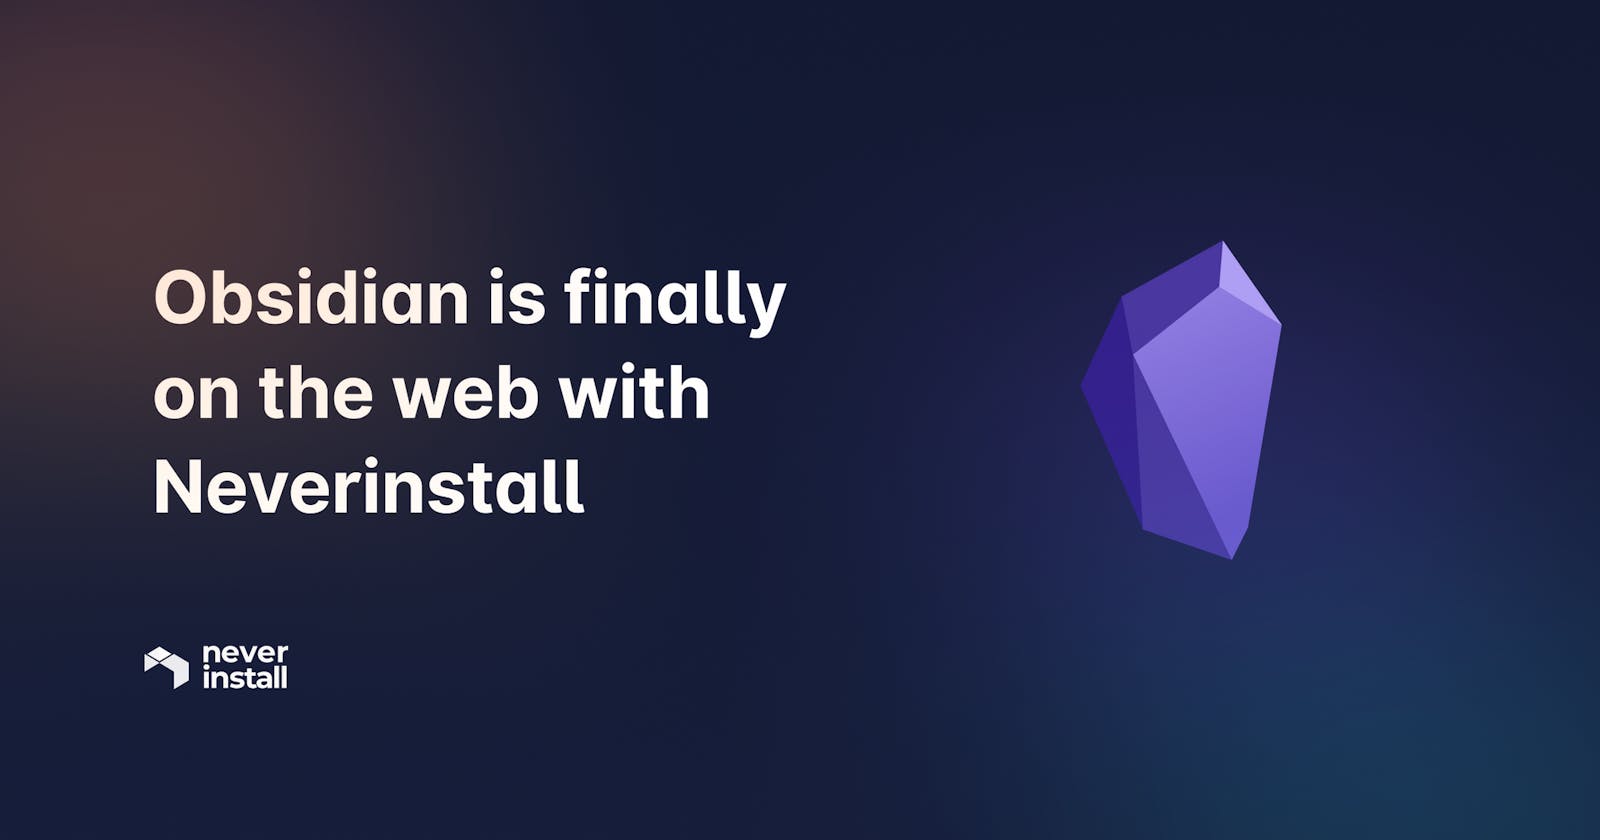 Obsidian is finally on the web with Neverinstall